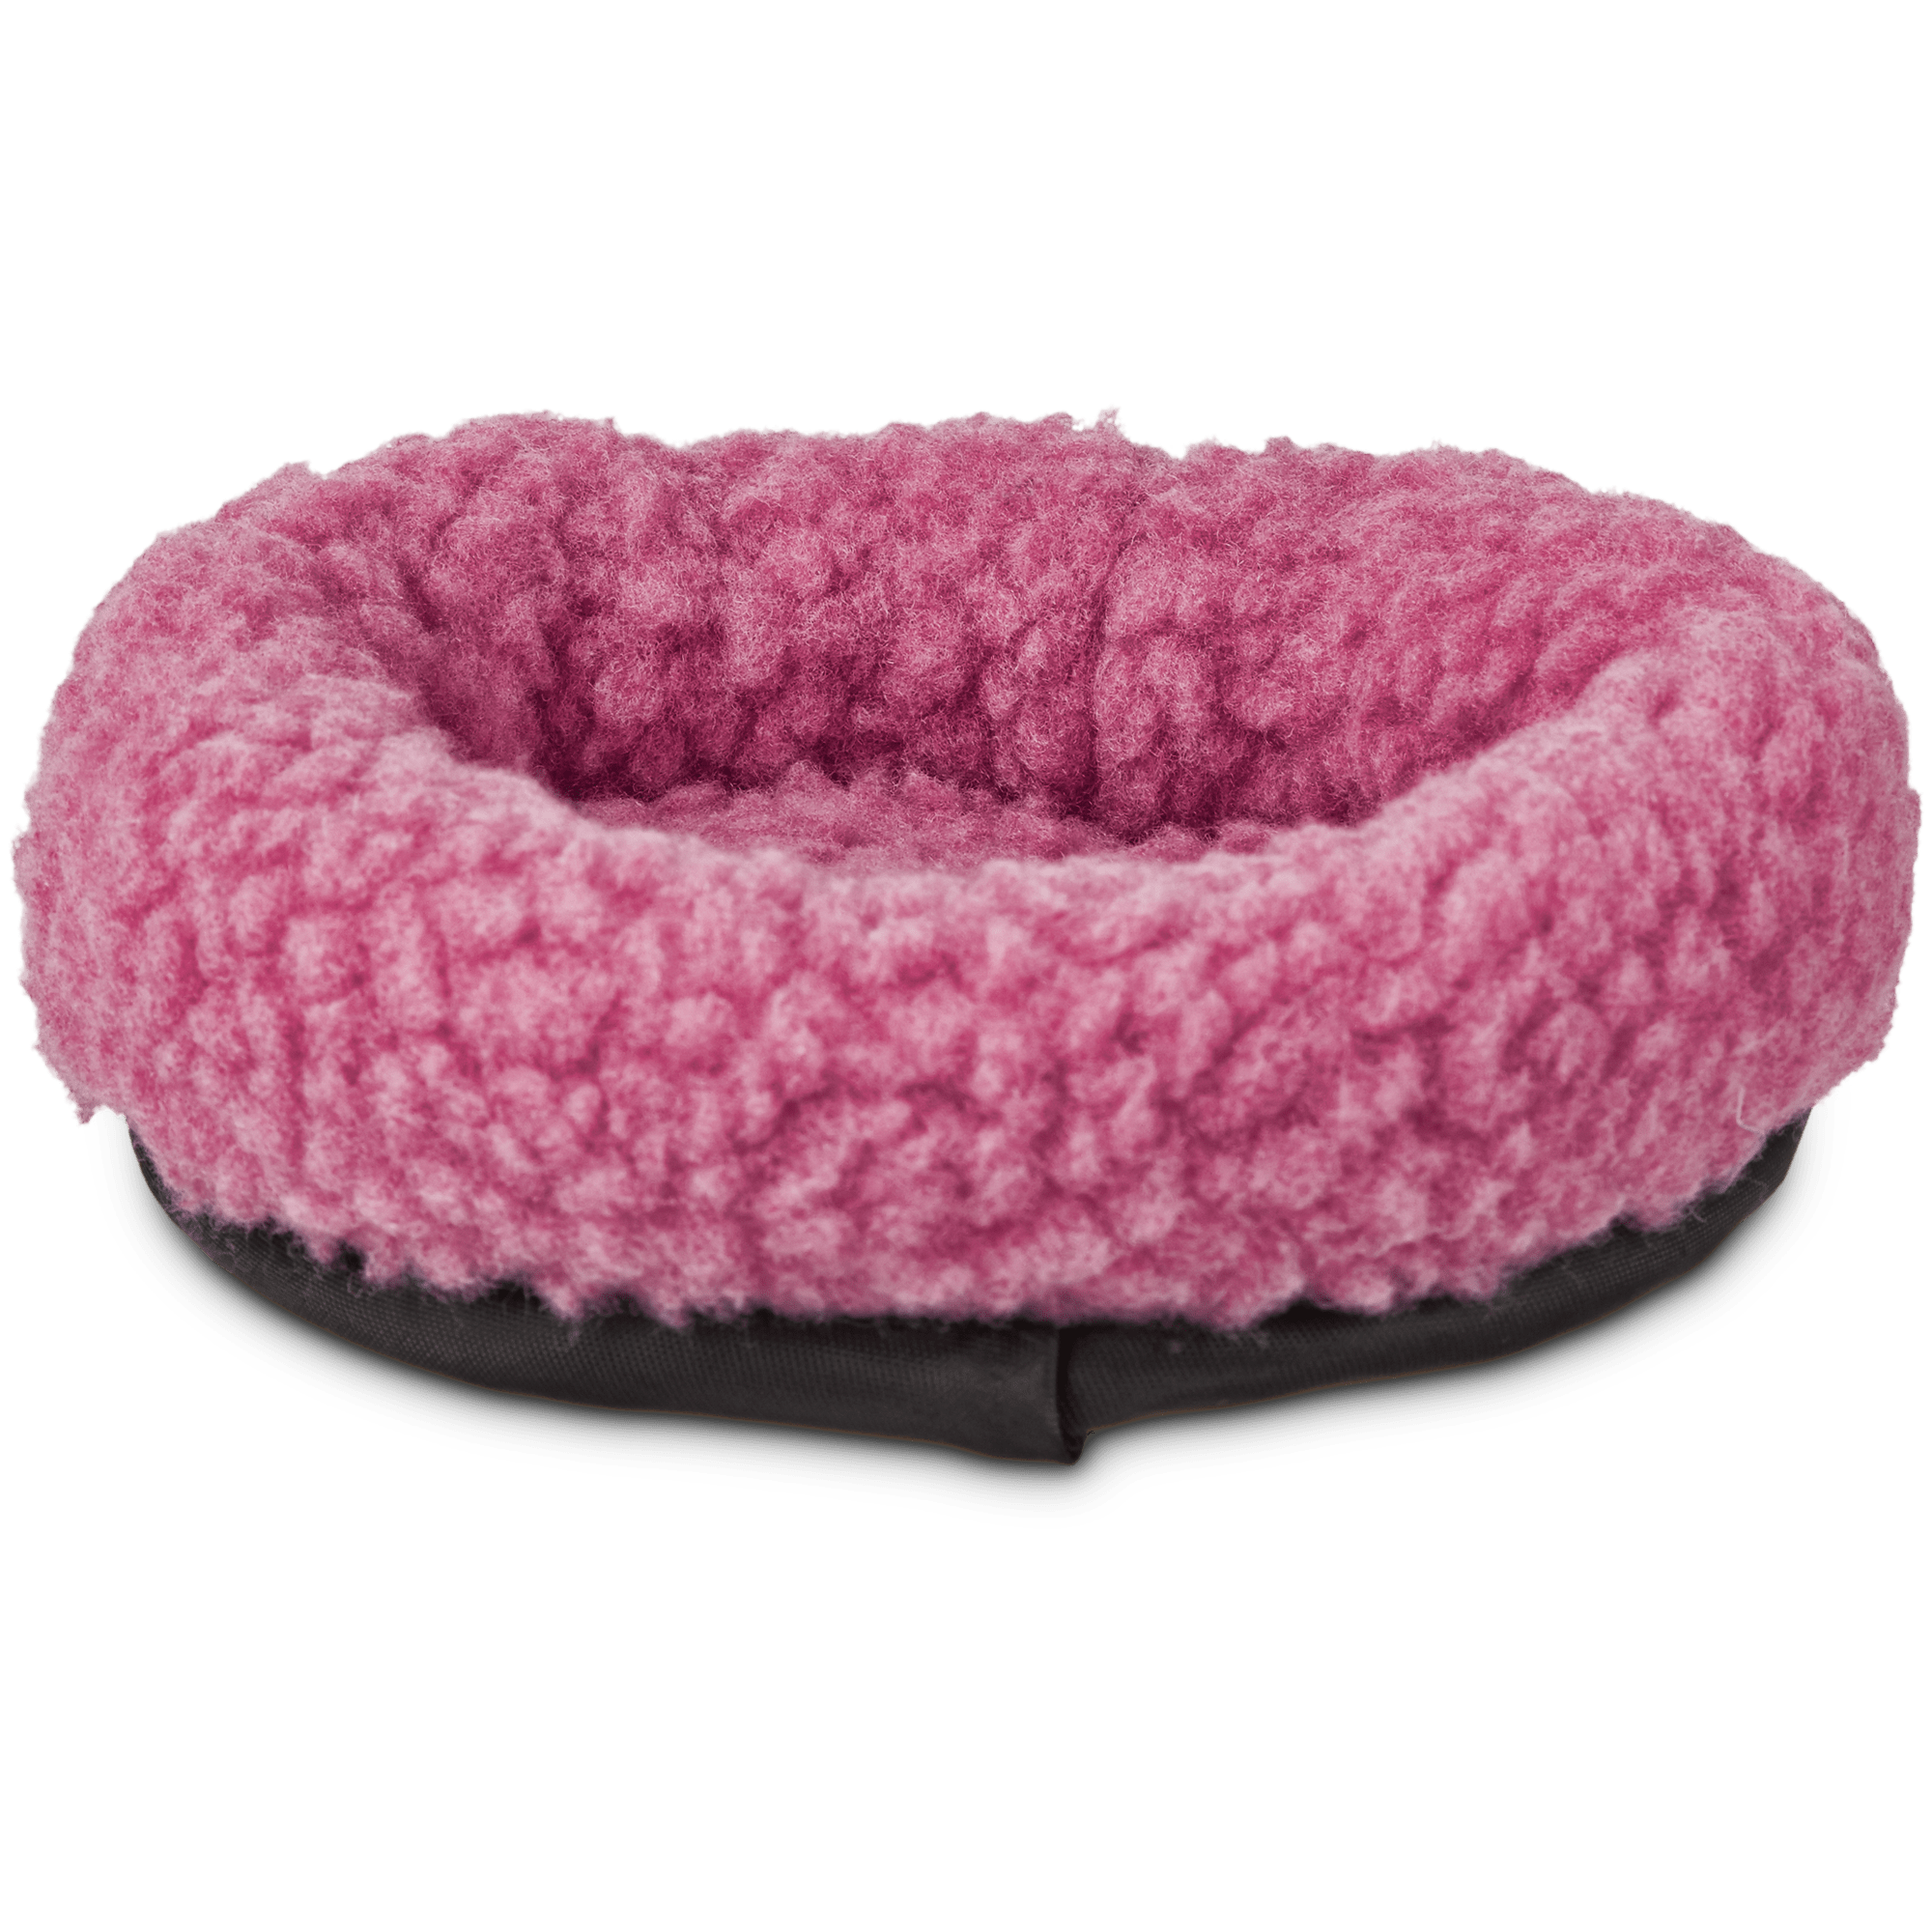 Cozy Bed Size MINI- Wine Rat Bed Crocheted Pet Bed Small Animal Bed Hamster Bed Guinea Pig Bed Yarn Bed Pet Bed